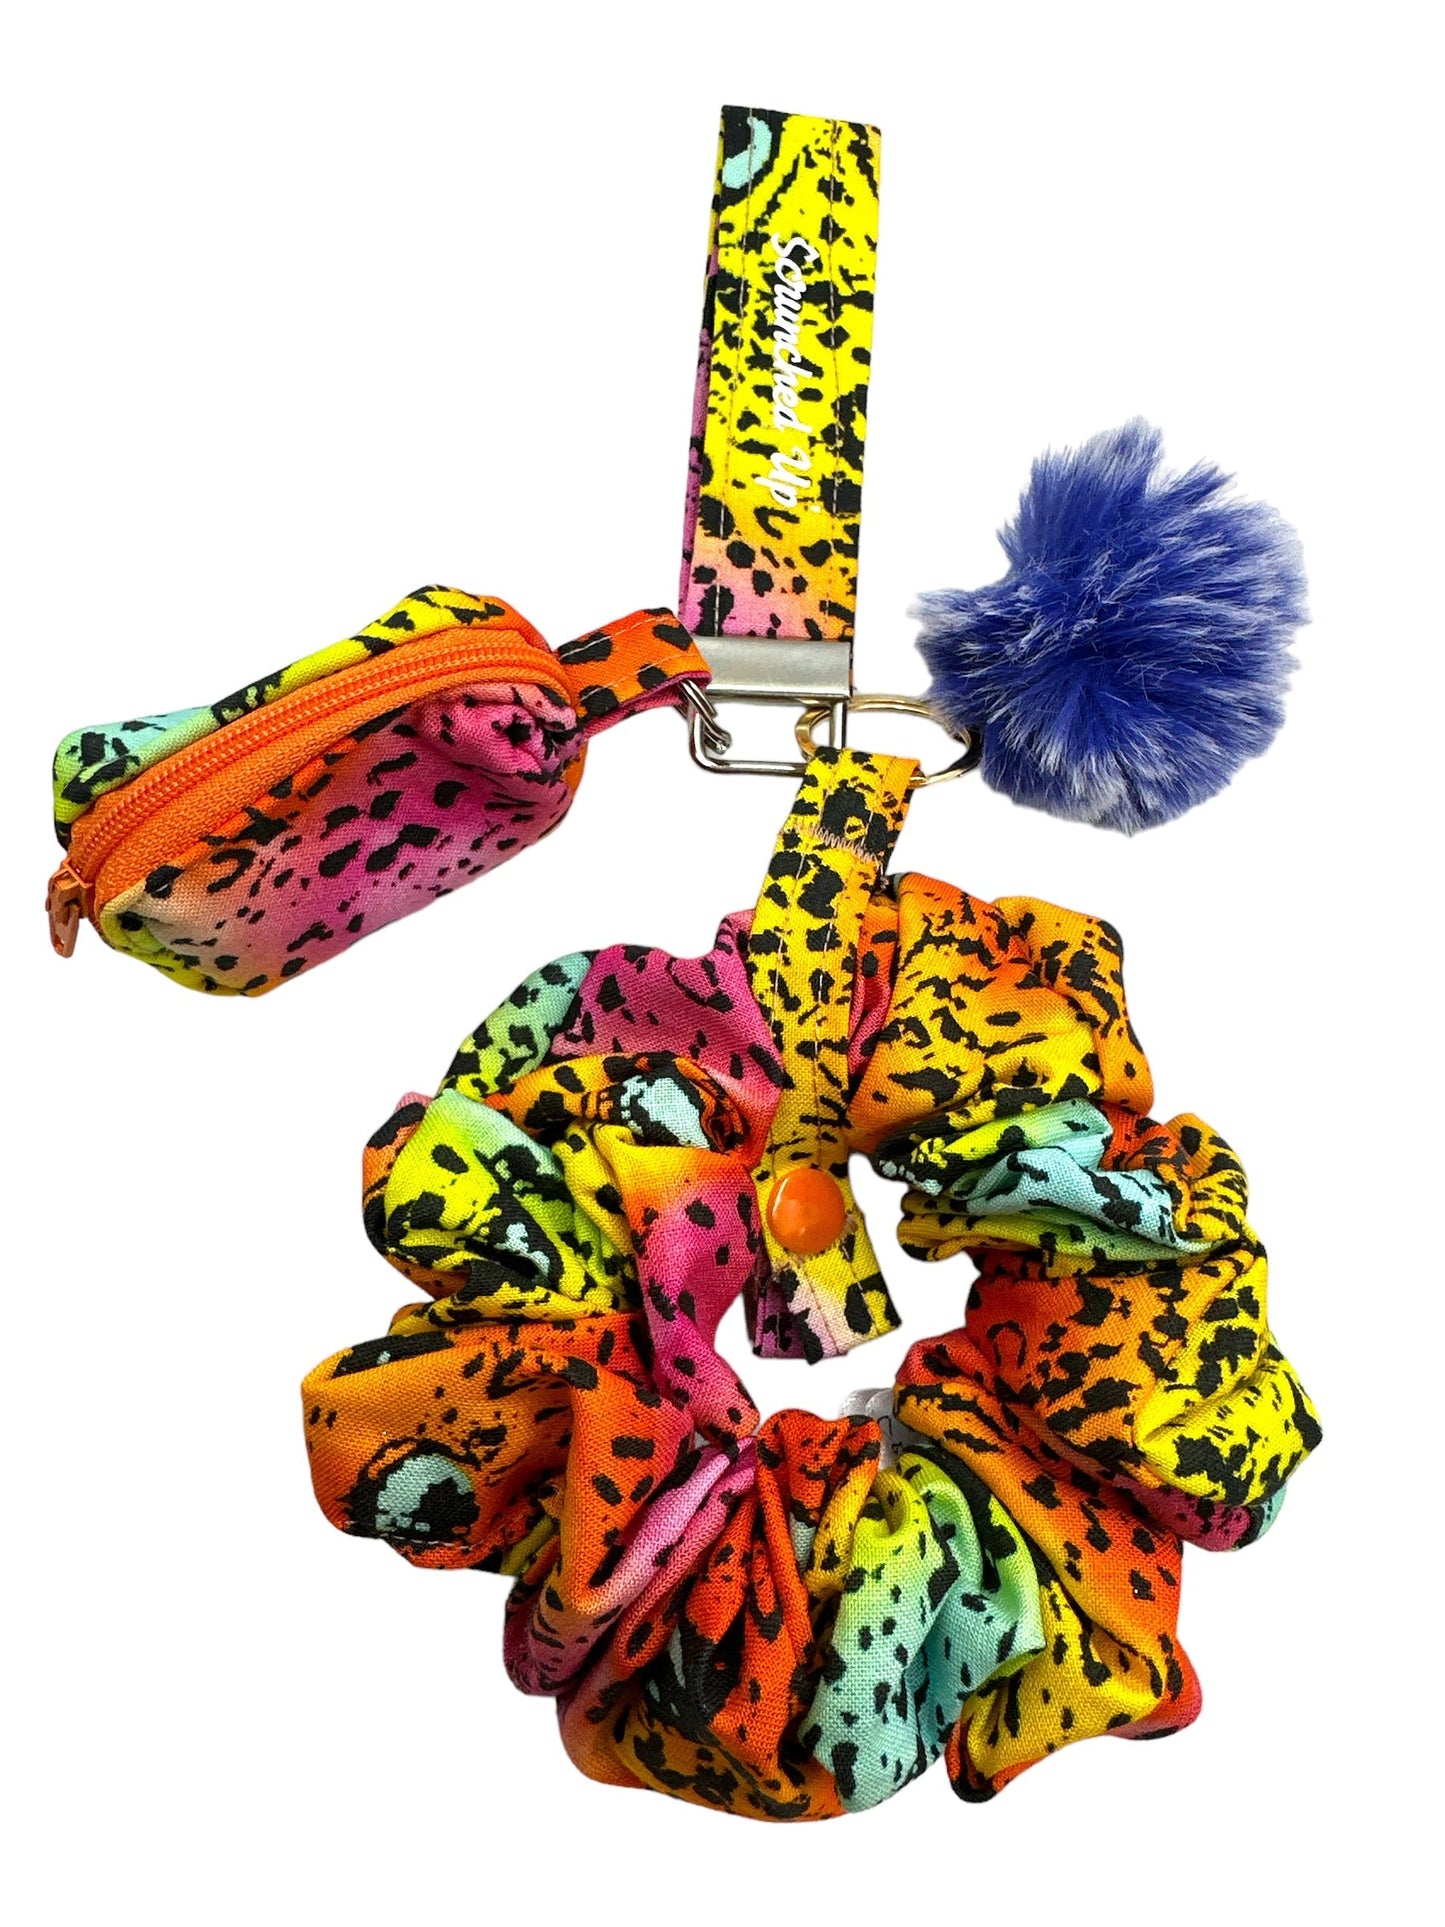 Colorful tiger keychain with detachable scrunchie